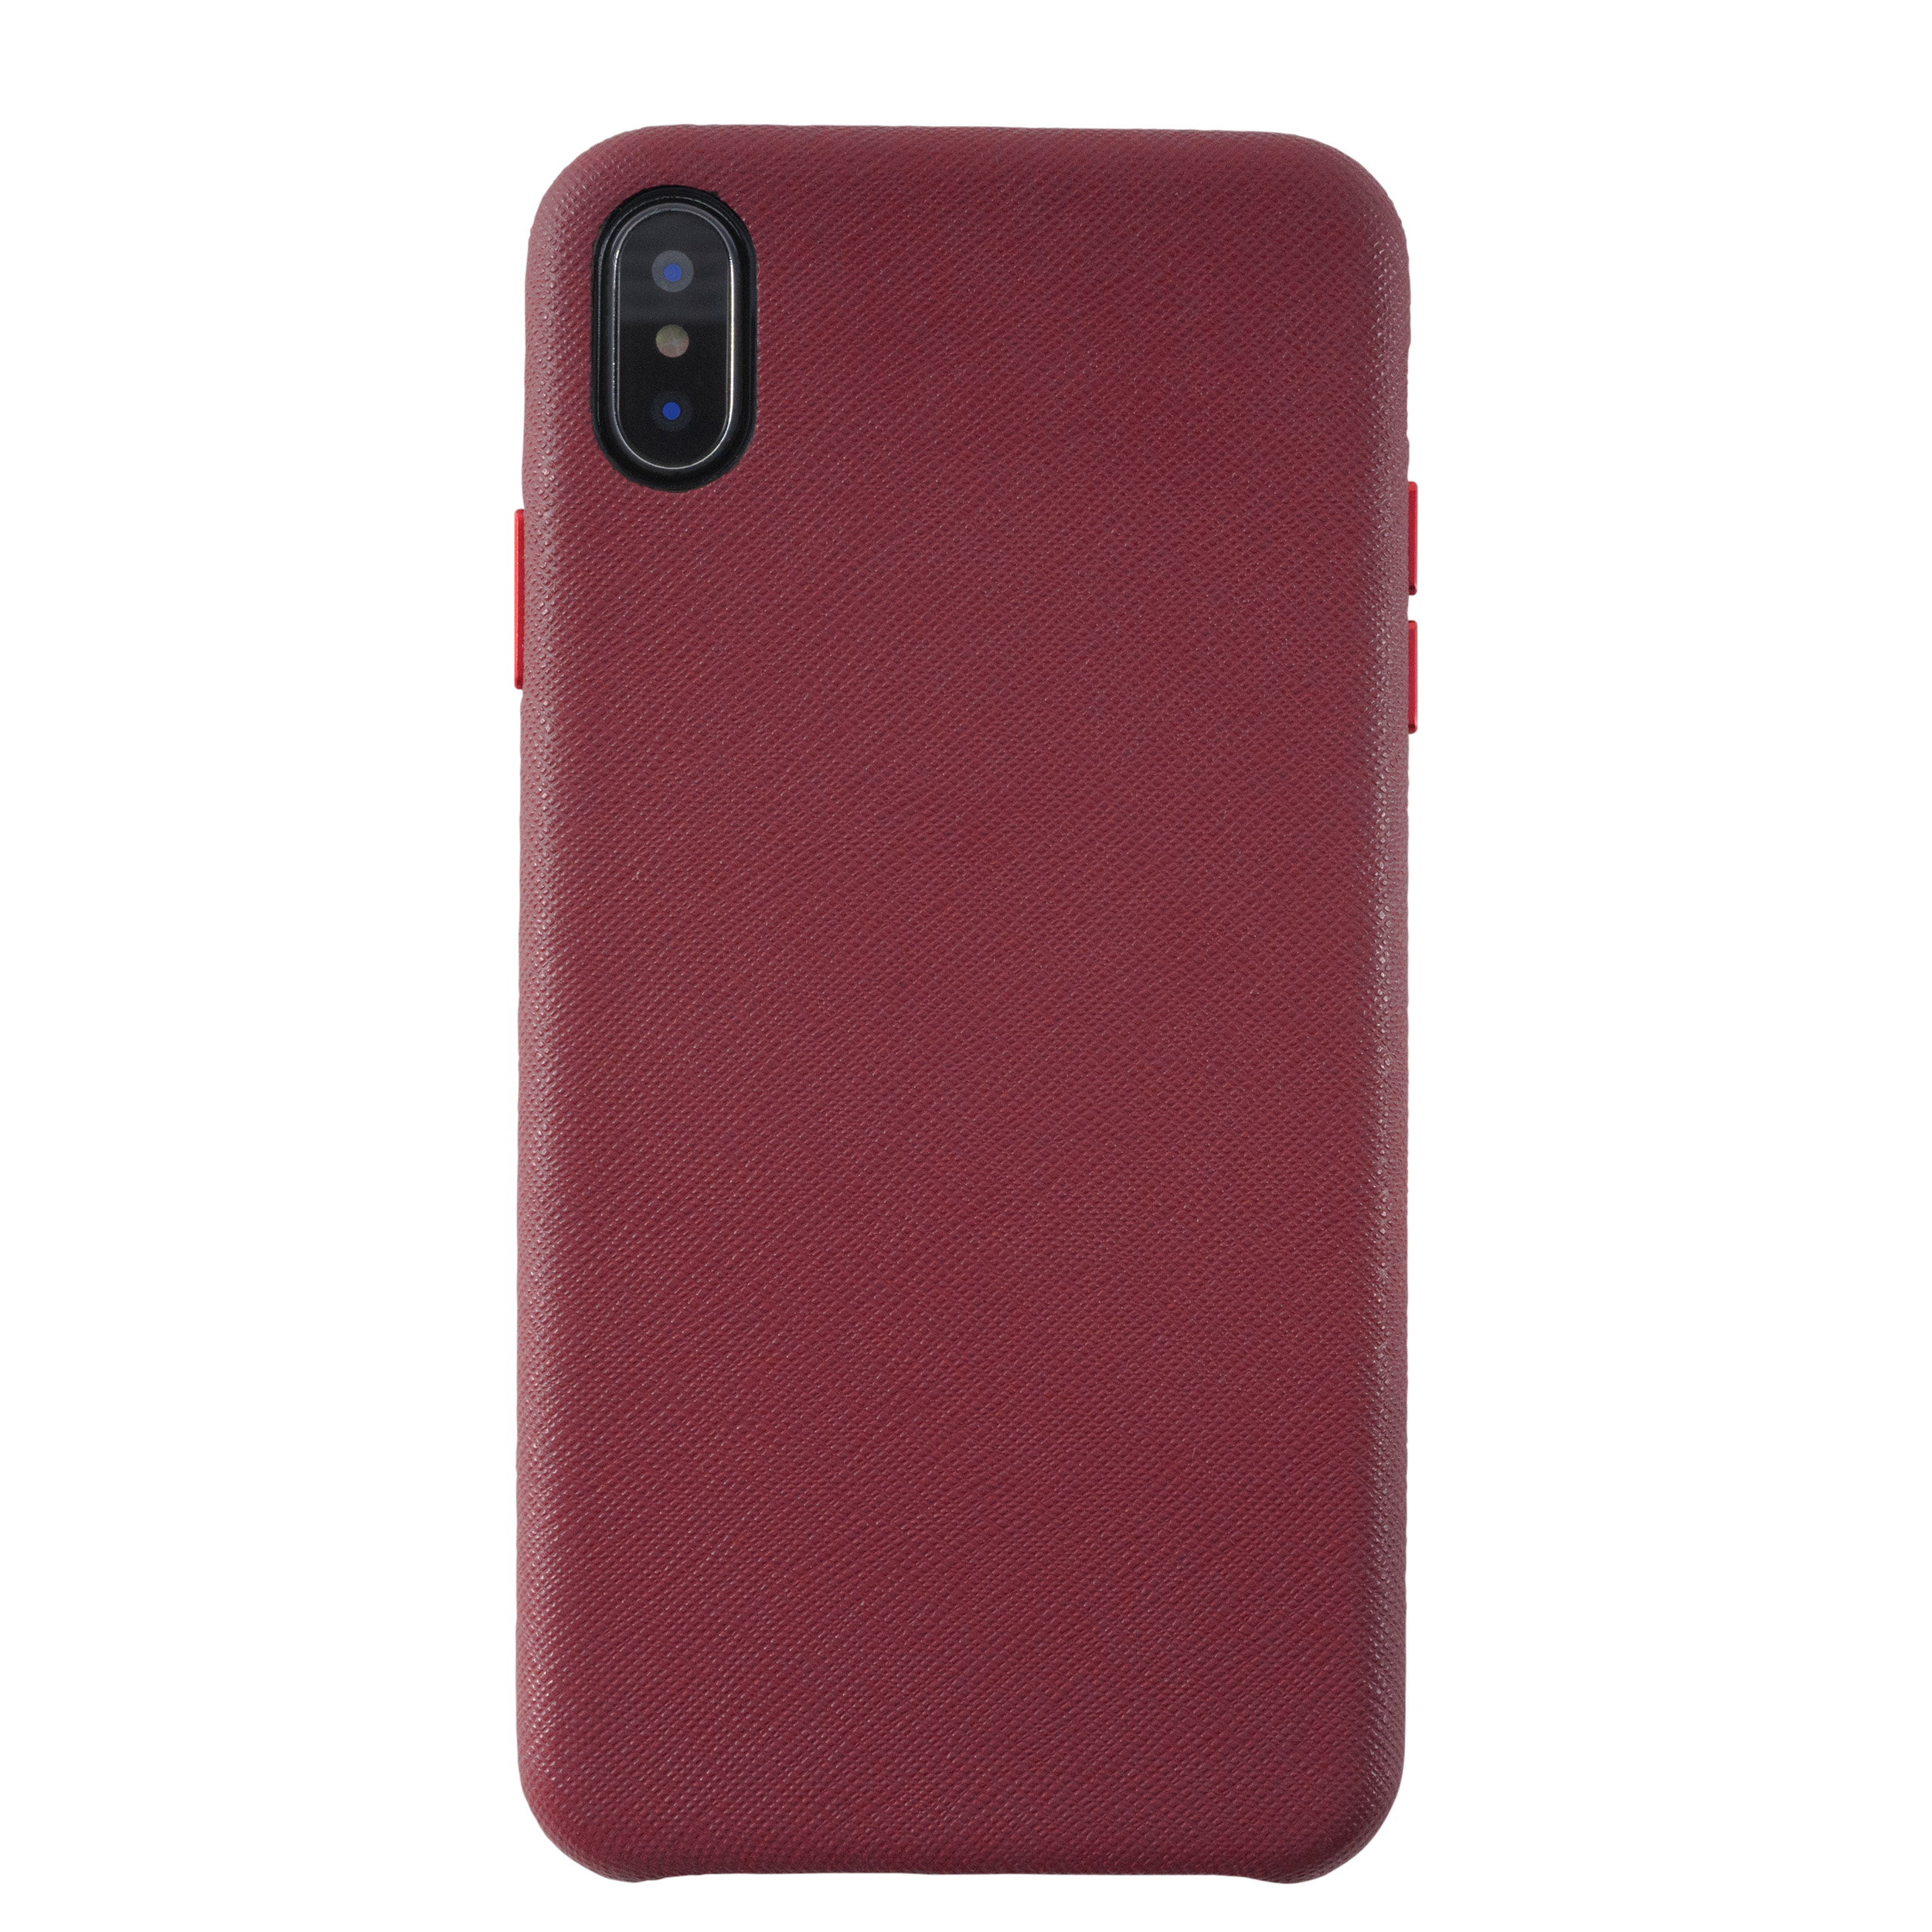 KMP Vegane Leder pear Cover, XS Apple, für XS Red, Pear red Max, Full iPhone Schutzhülle iPhone Max